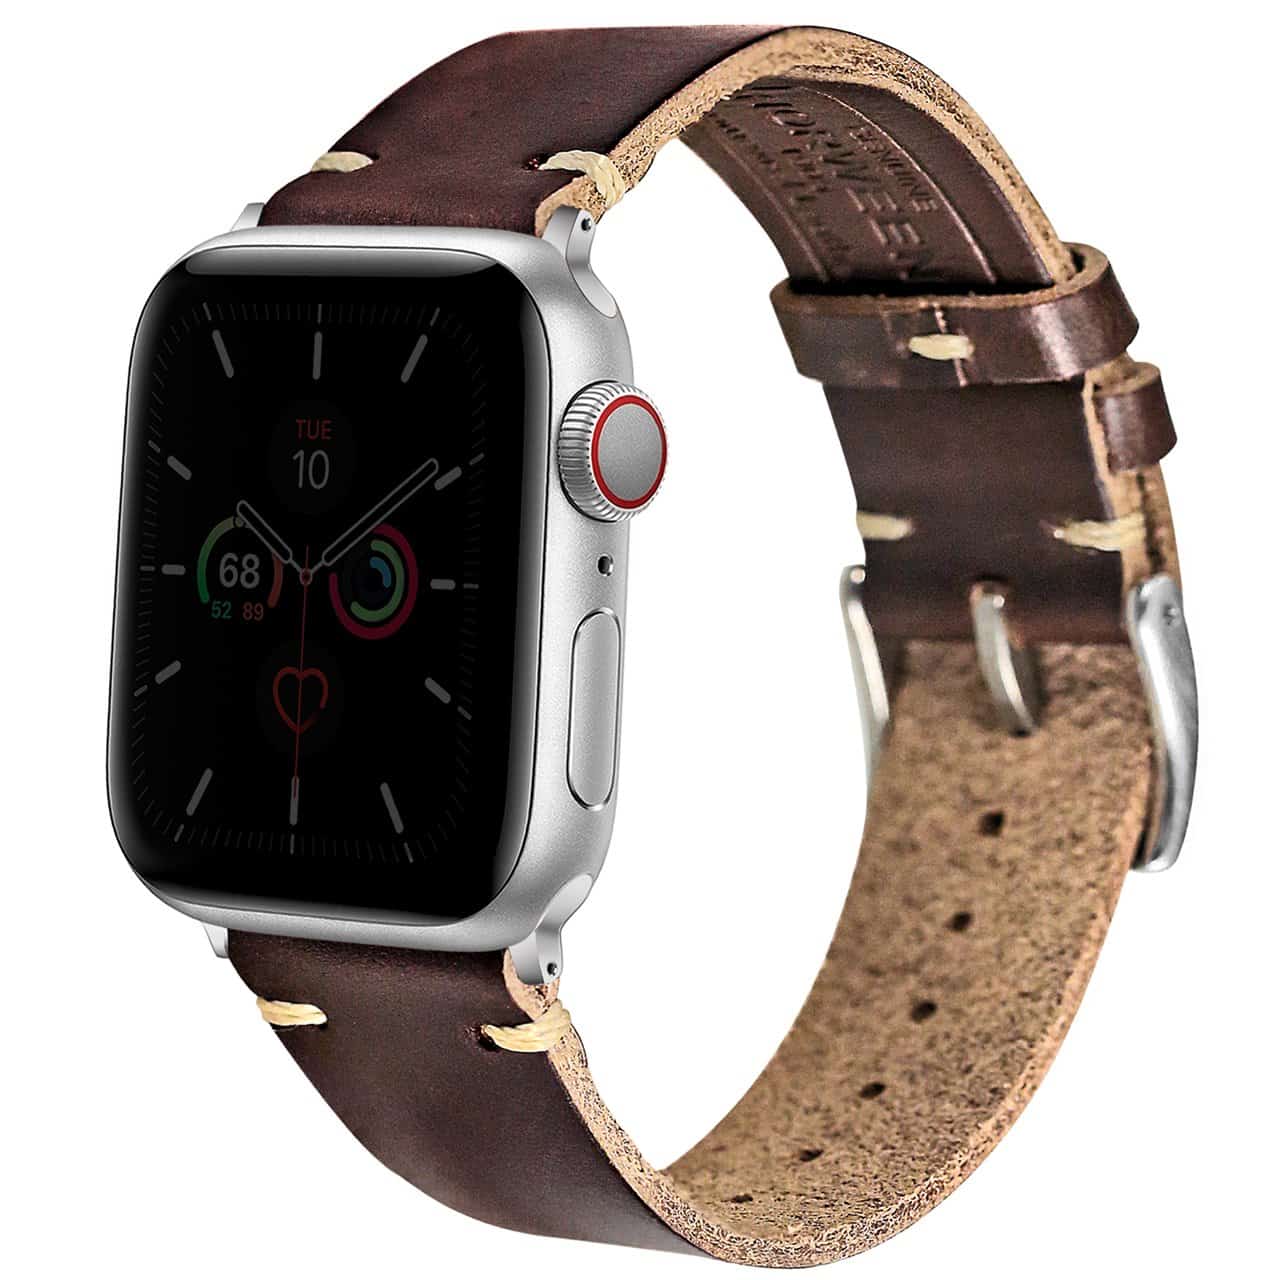 Apple Watch Bands | Horween Leather Watch Straps | Black